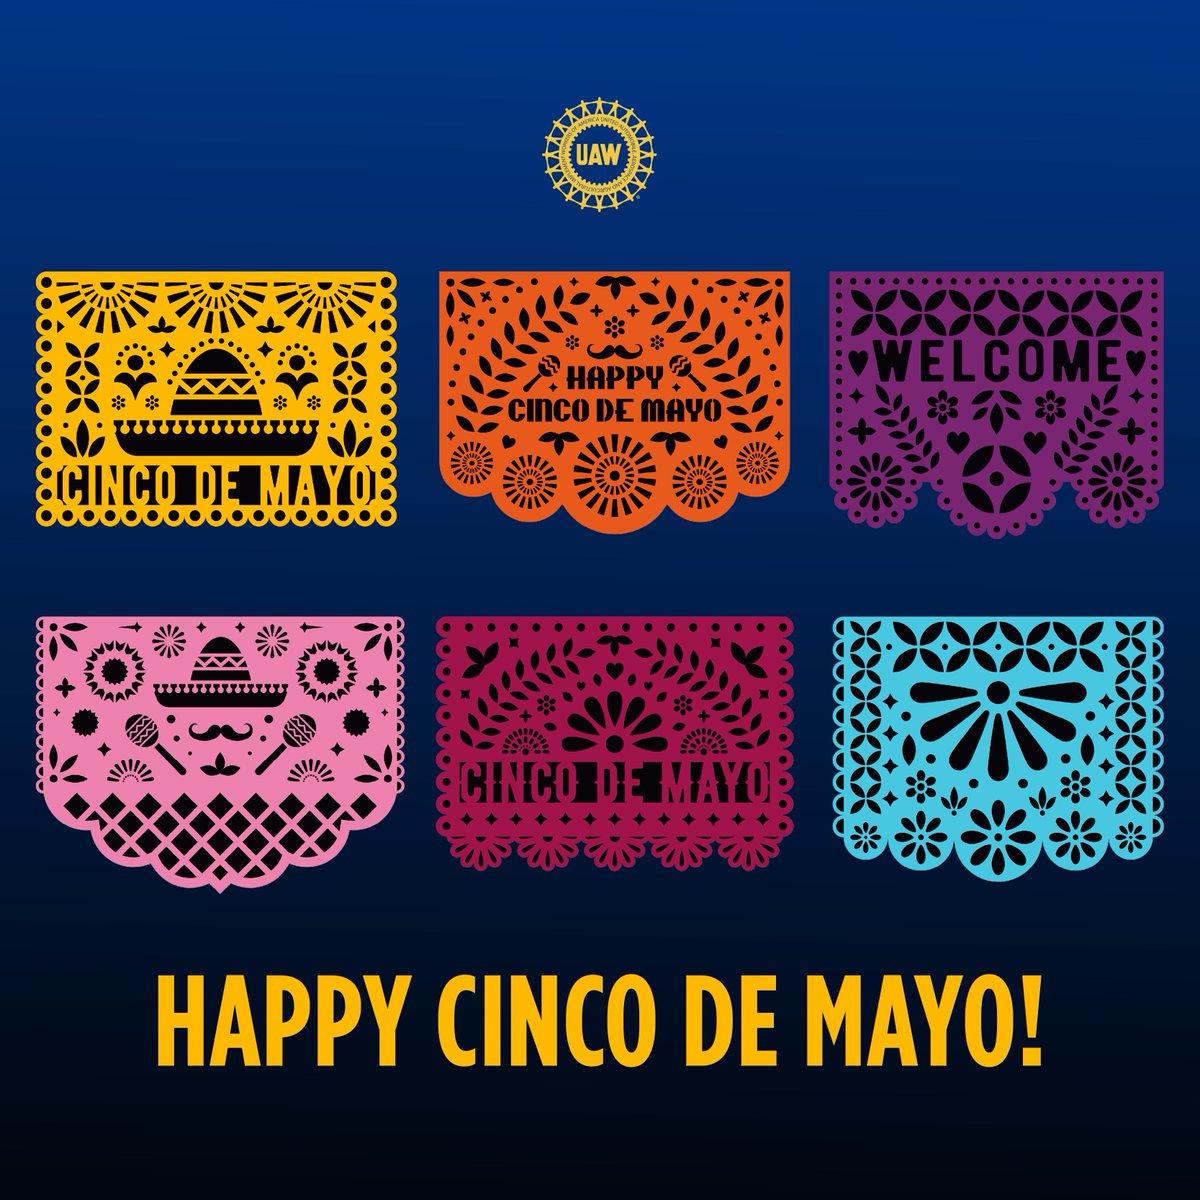 Happy Cinco de Mayo! Today, we celebrate the rich history, vibrant culture, and fighting spirit of Mexico! #CincoDeMayo #StandUpUAW